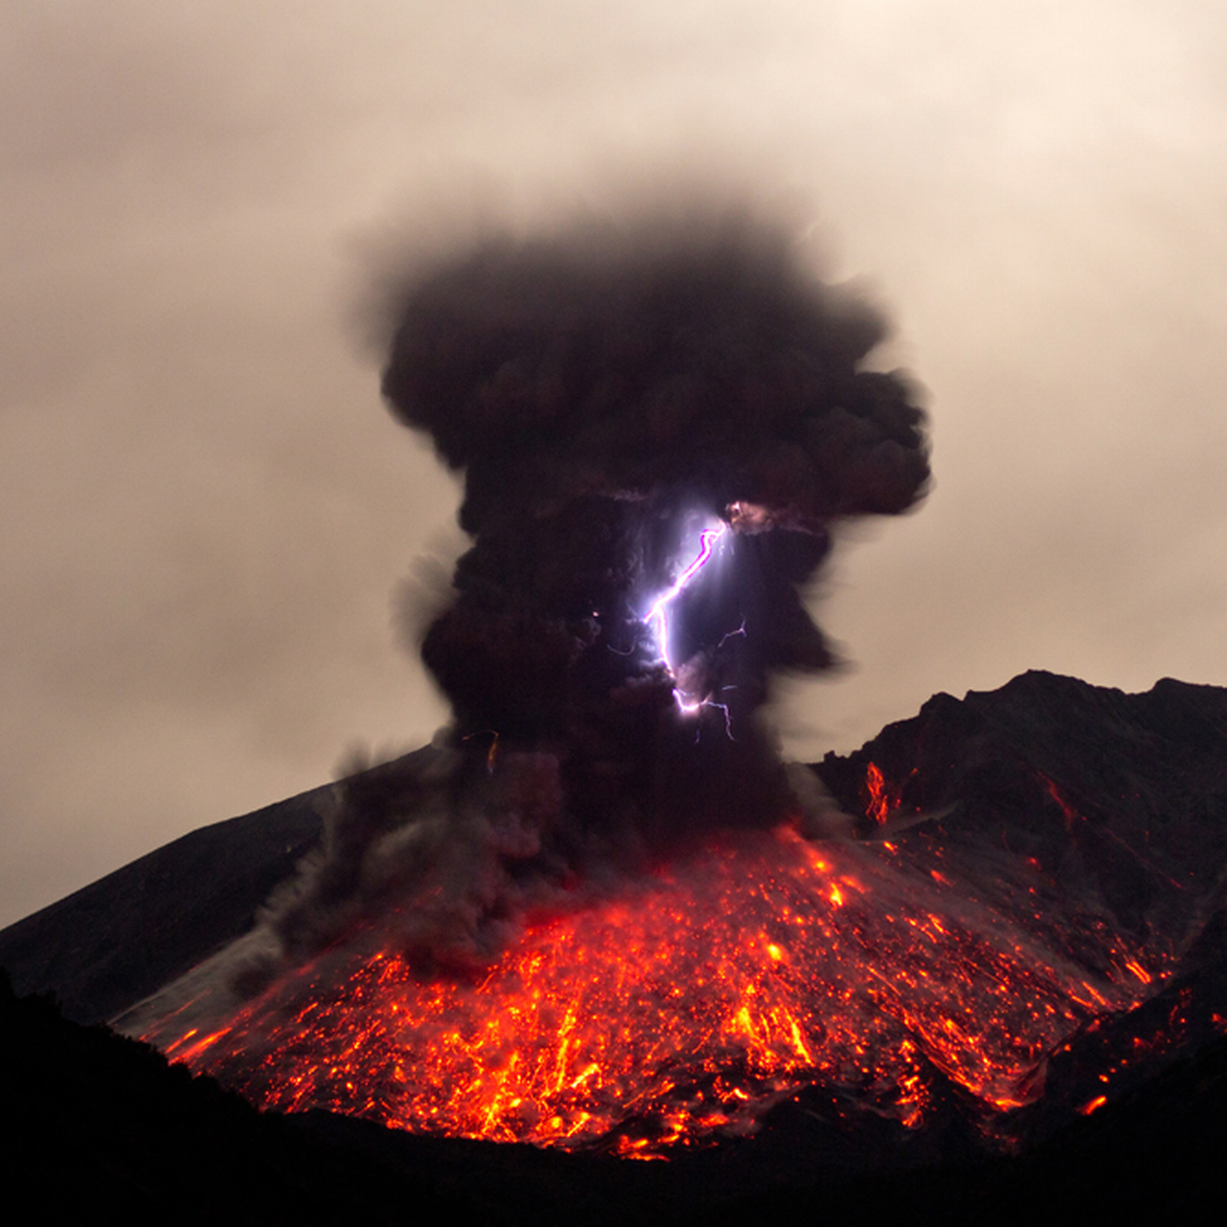 Force of nature: Lightning strikes volcano eruption in jaw ...